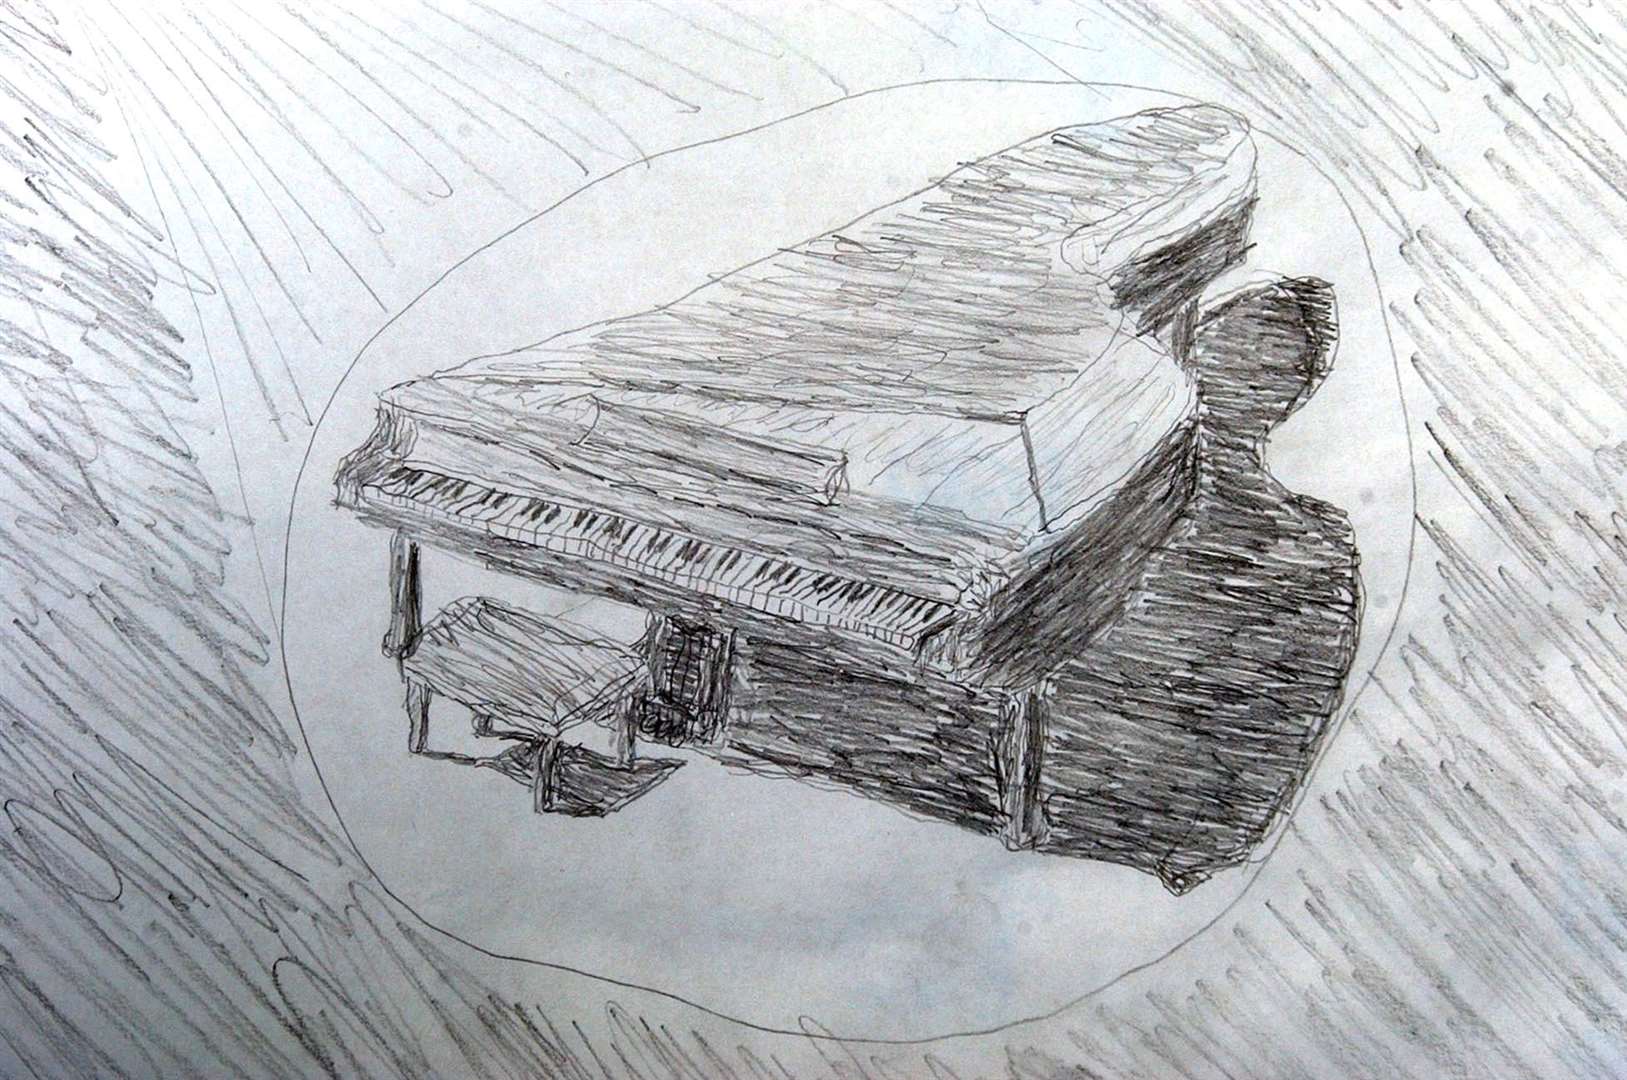 Photographer Mike Gunnill took this copy of "Piano Man's sketch of a grand piano while at Medway Maritime Hospital, Gillingham